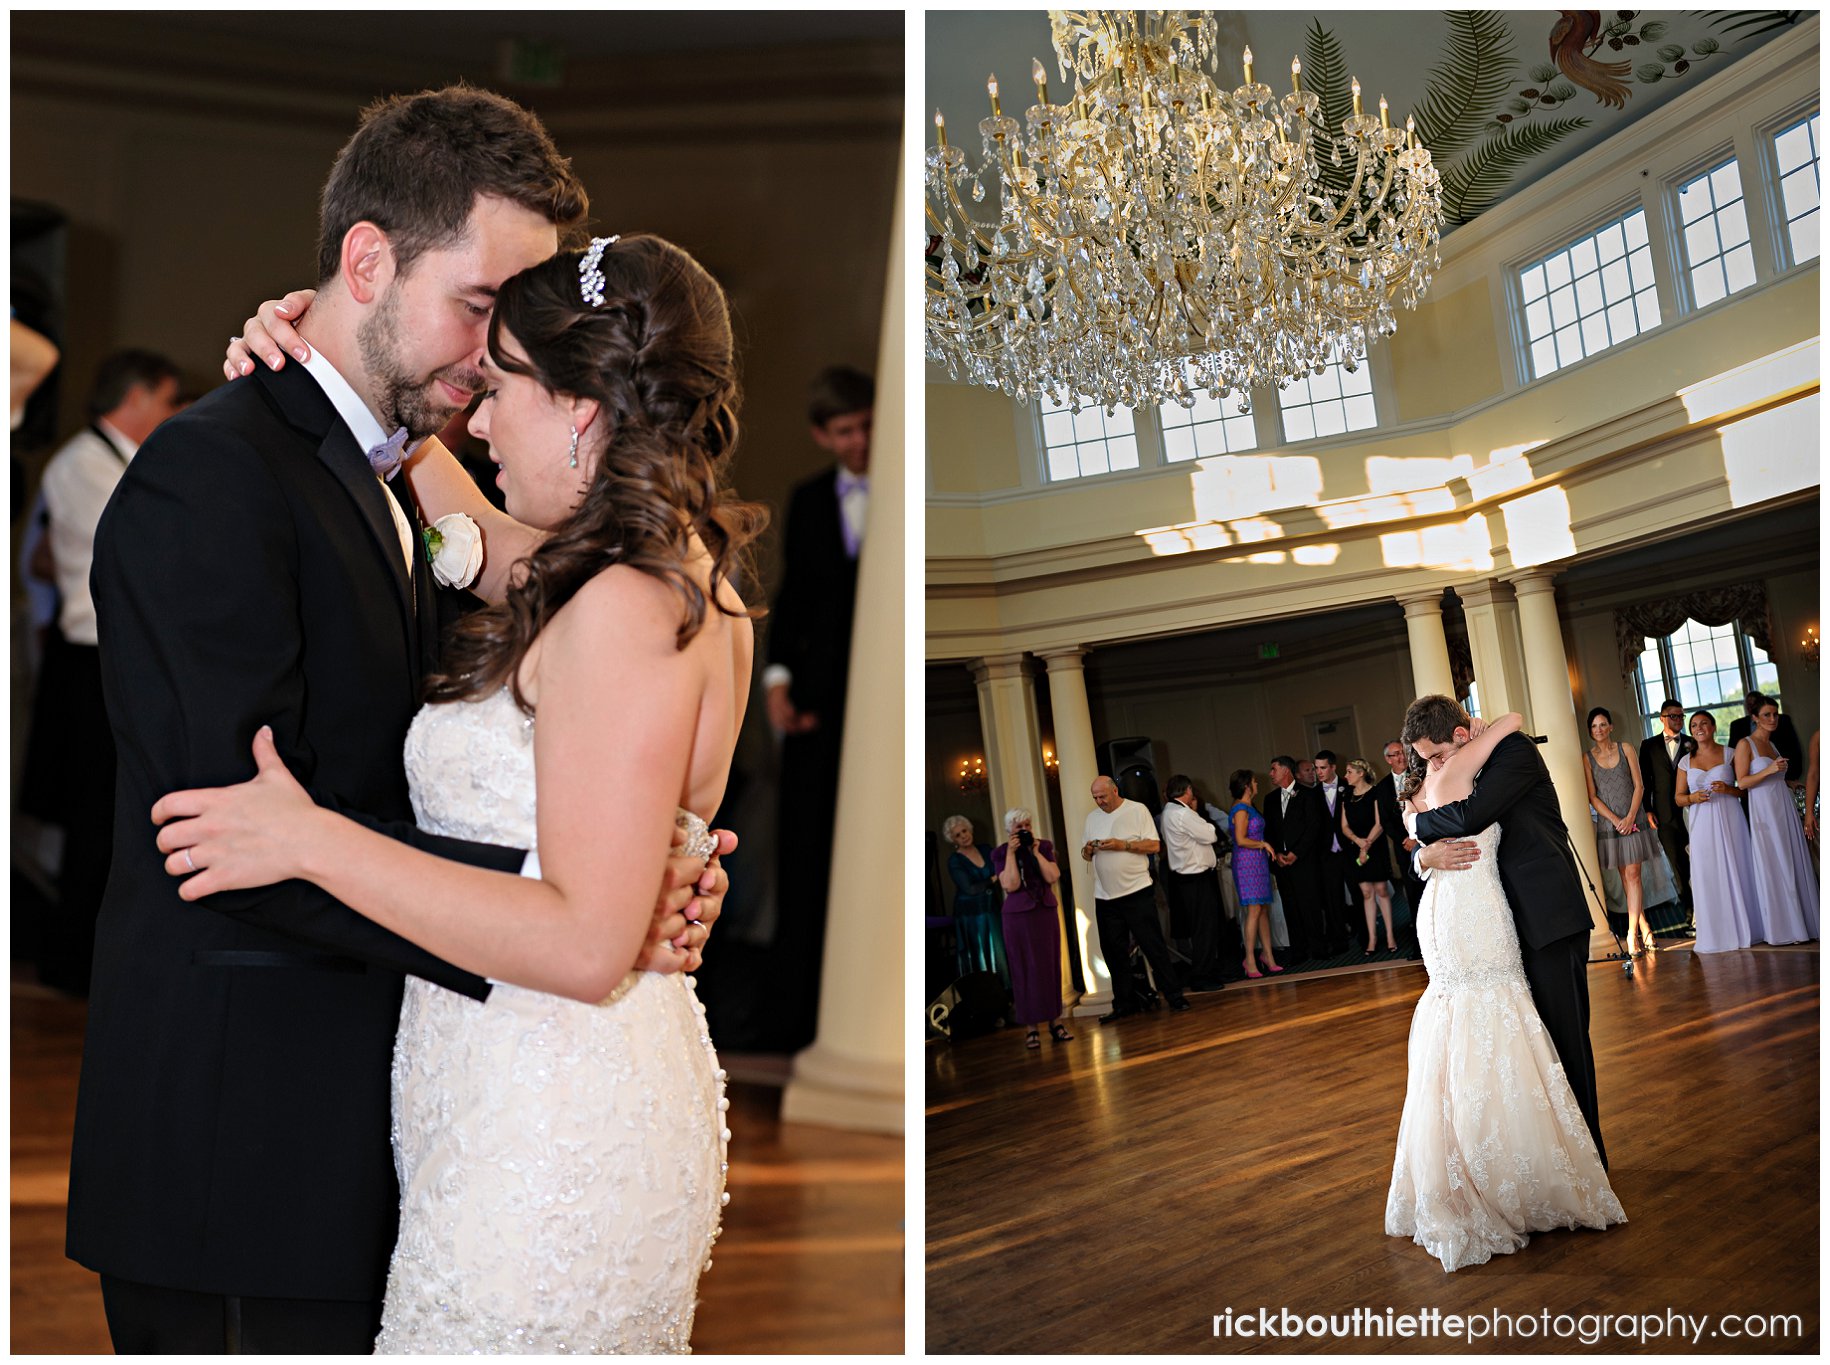 Bride and groom enjoy their first dance in the Crystal Ballroom